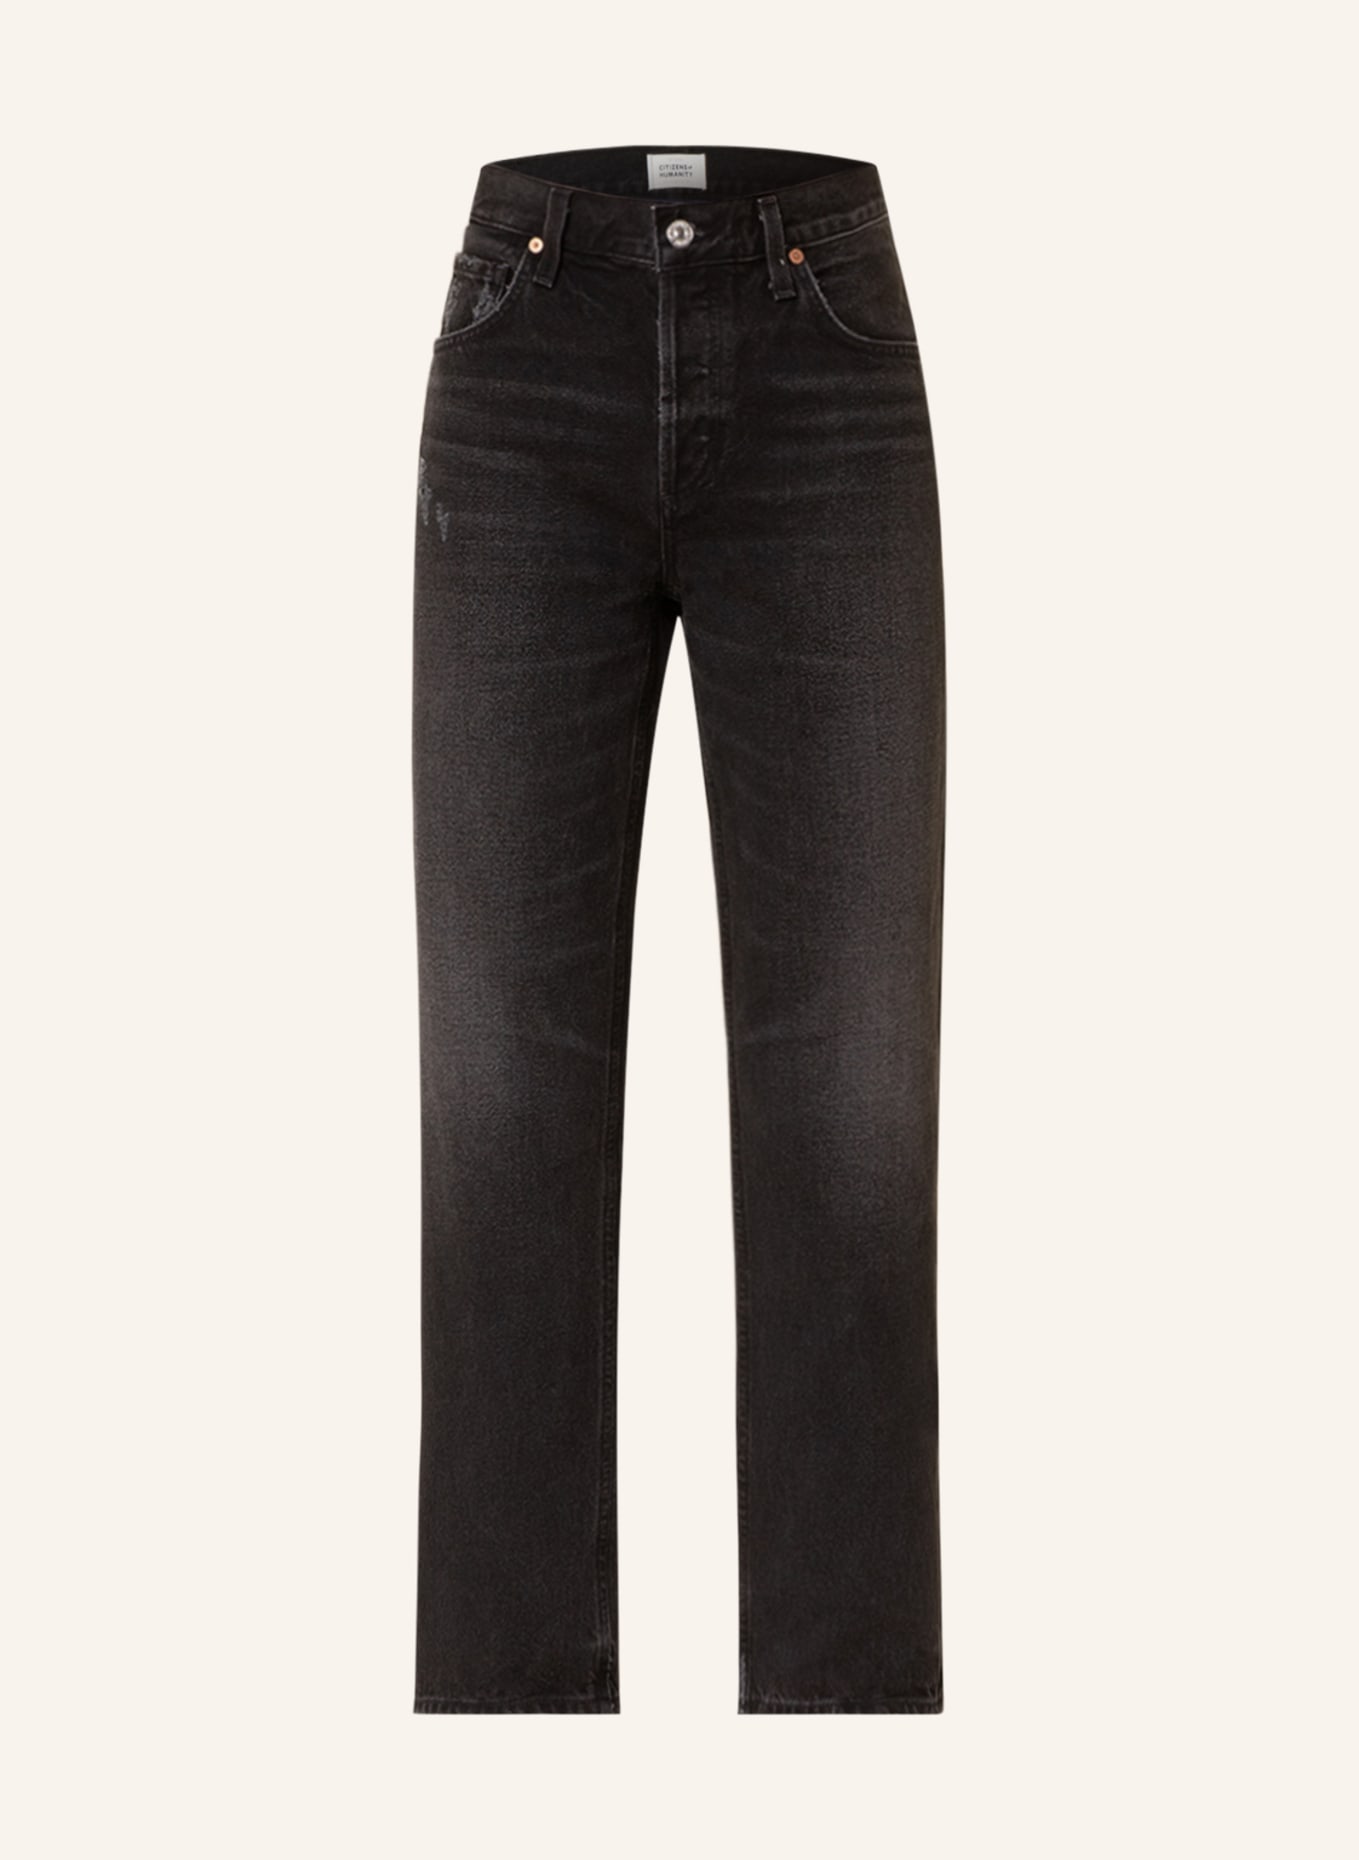 CITIZENS of HUMANITY Straight Jeans NEVE, Farbe: Obsidian dk washed black (Bild 1)